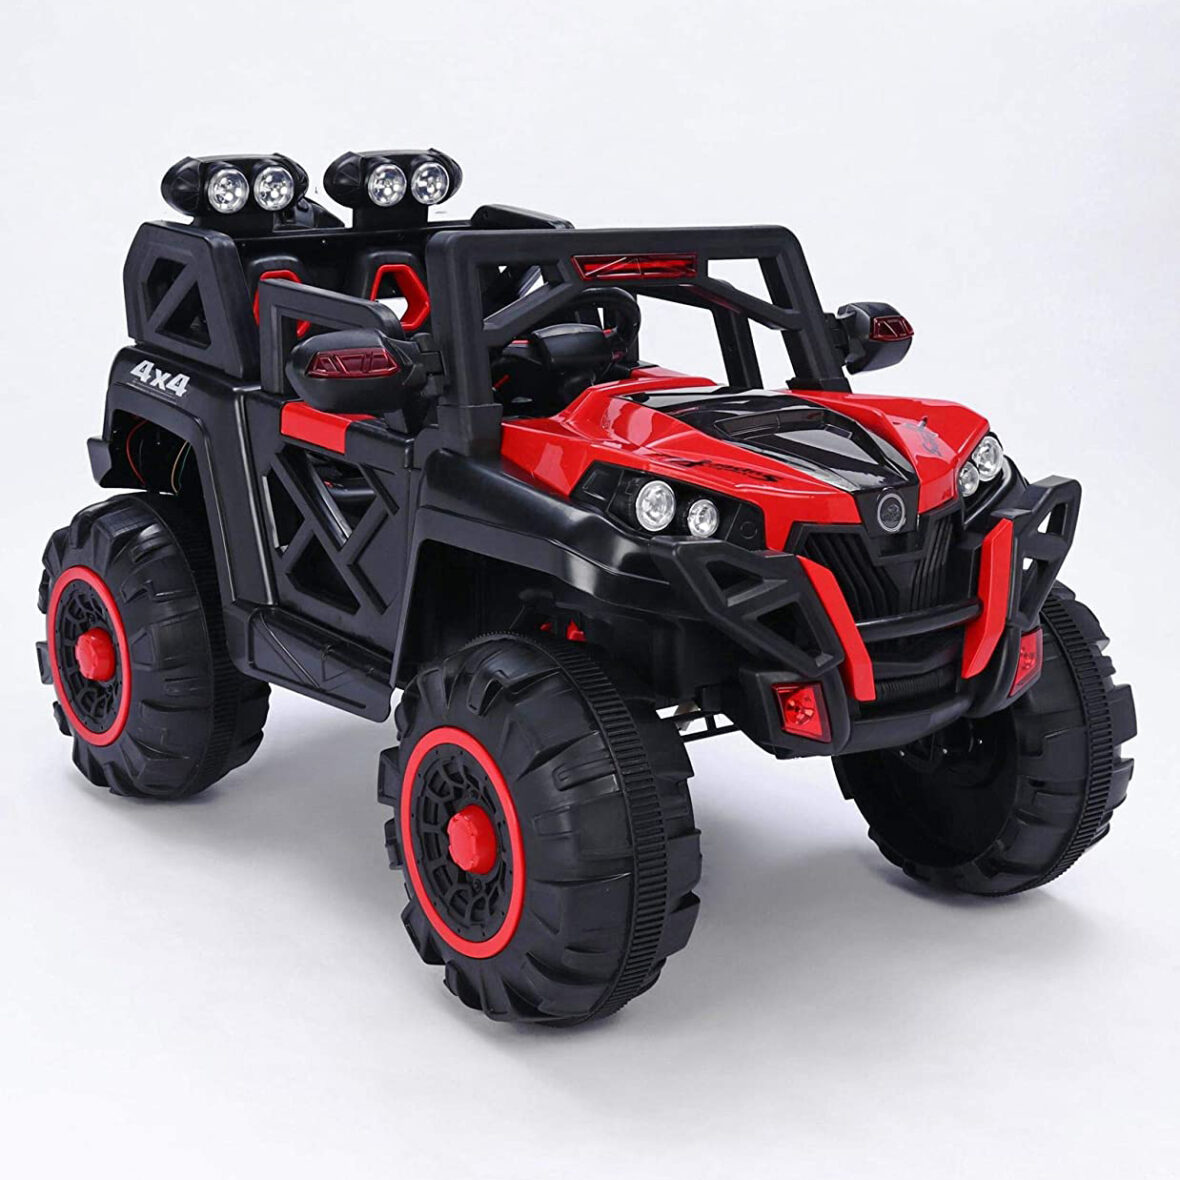 U Smile 4×4 Electric Battery Operated Ride on Jeep for Kids with 6 Motors, Music, Spring Suspension and Swing, Red